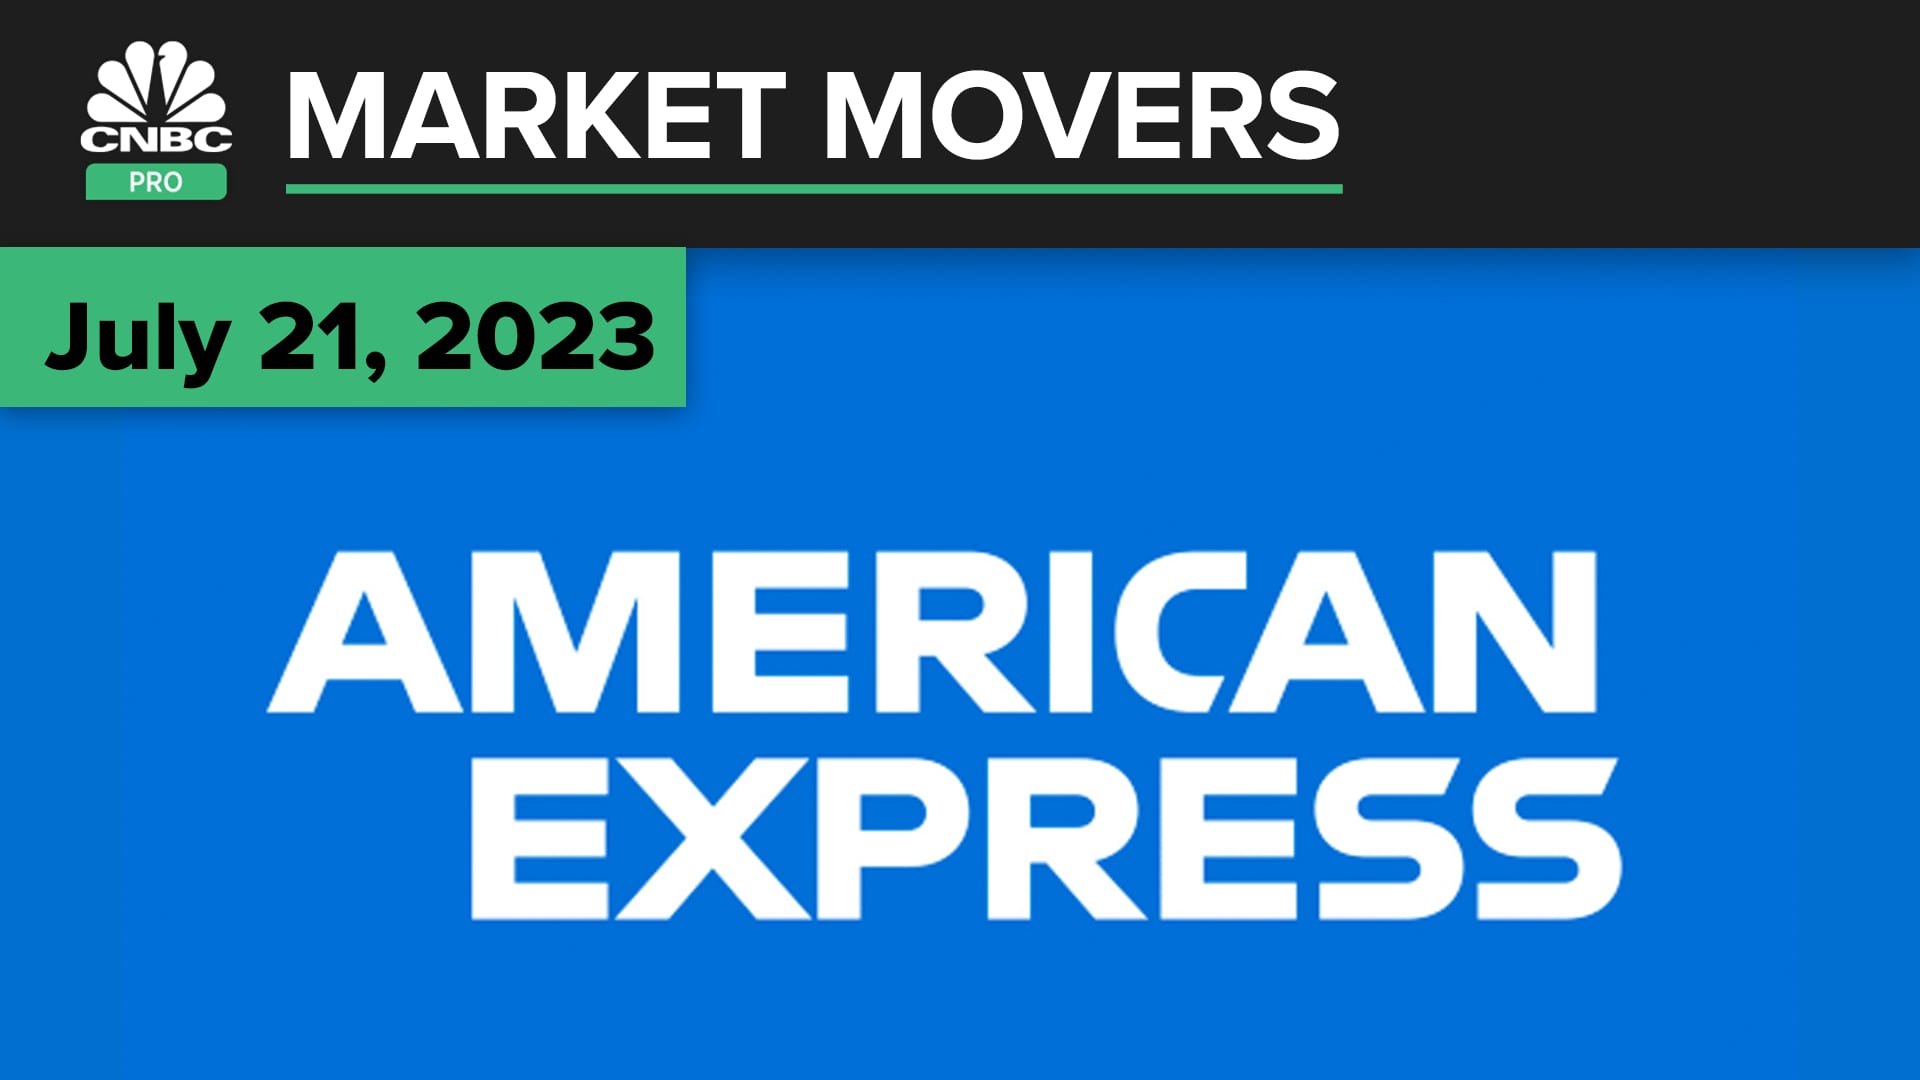 American Express shares dip after earnings. Here's how to play the stock